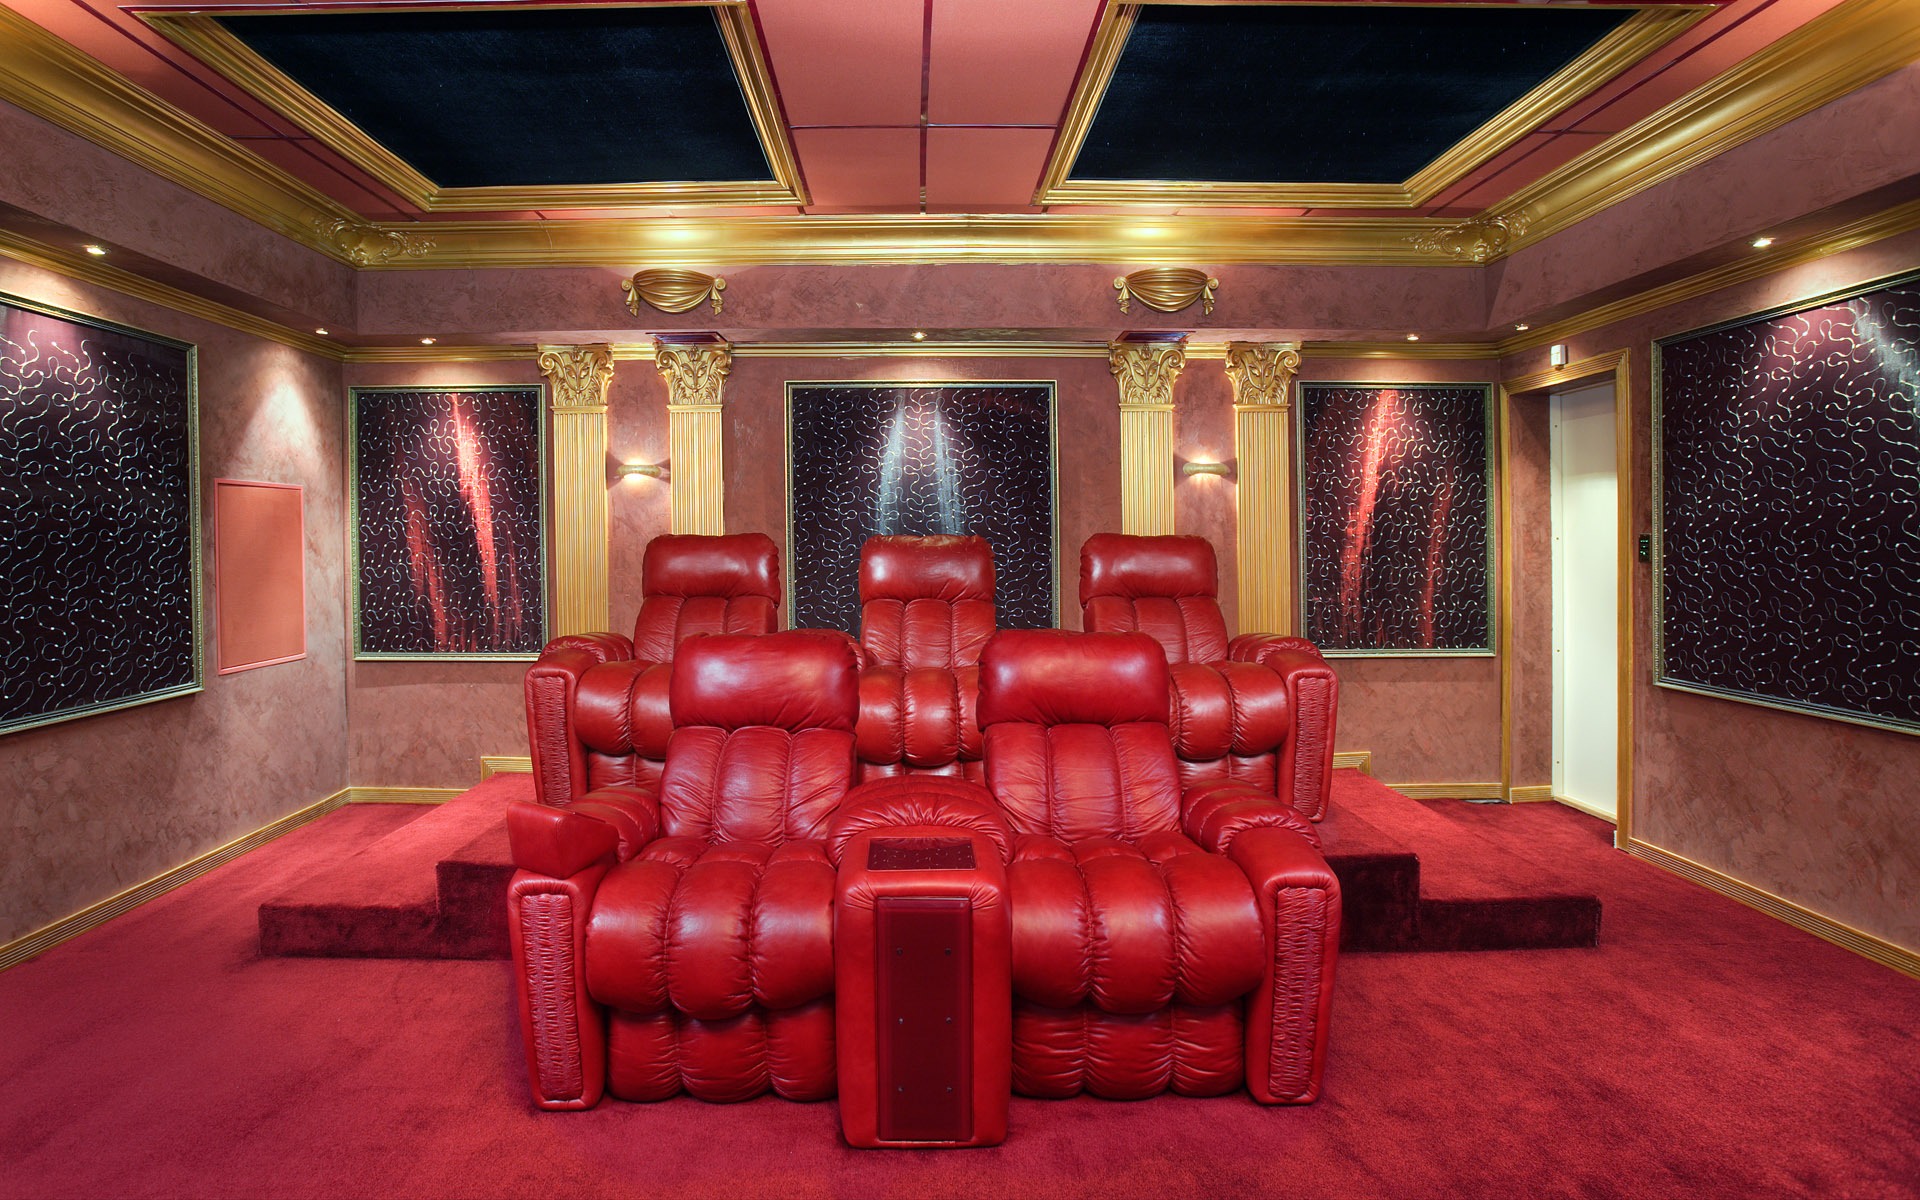 Home Theater wallpaper (1) #6 - 1920x1200